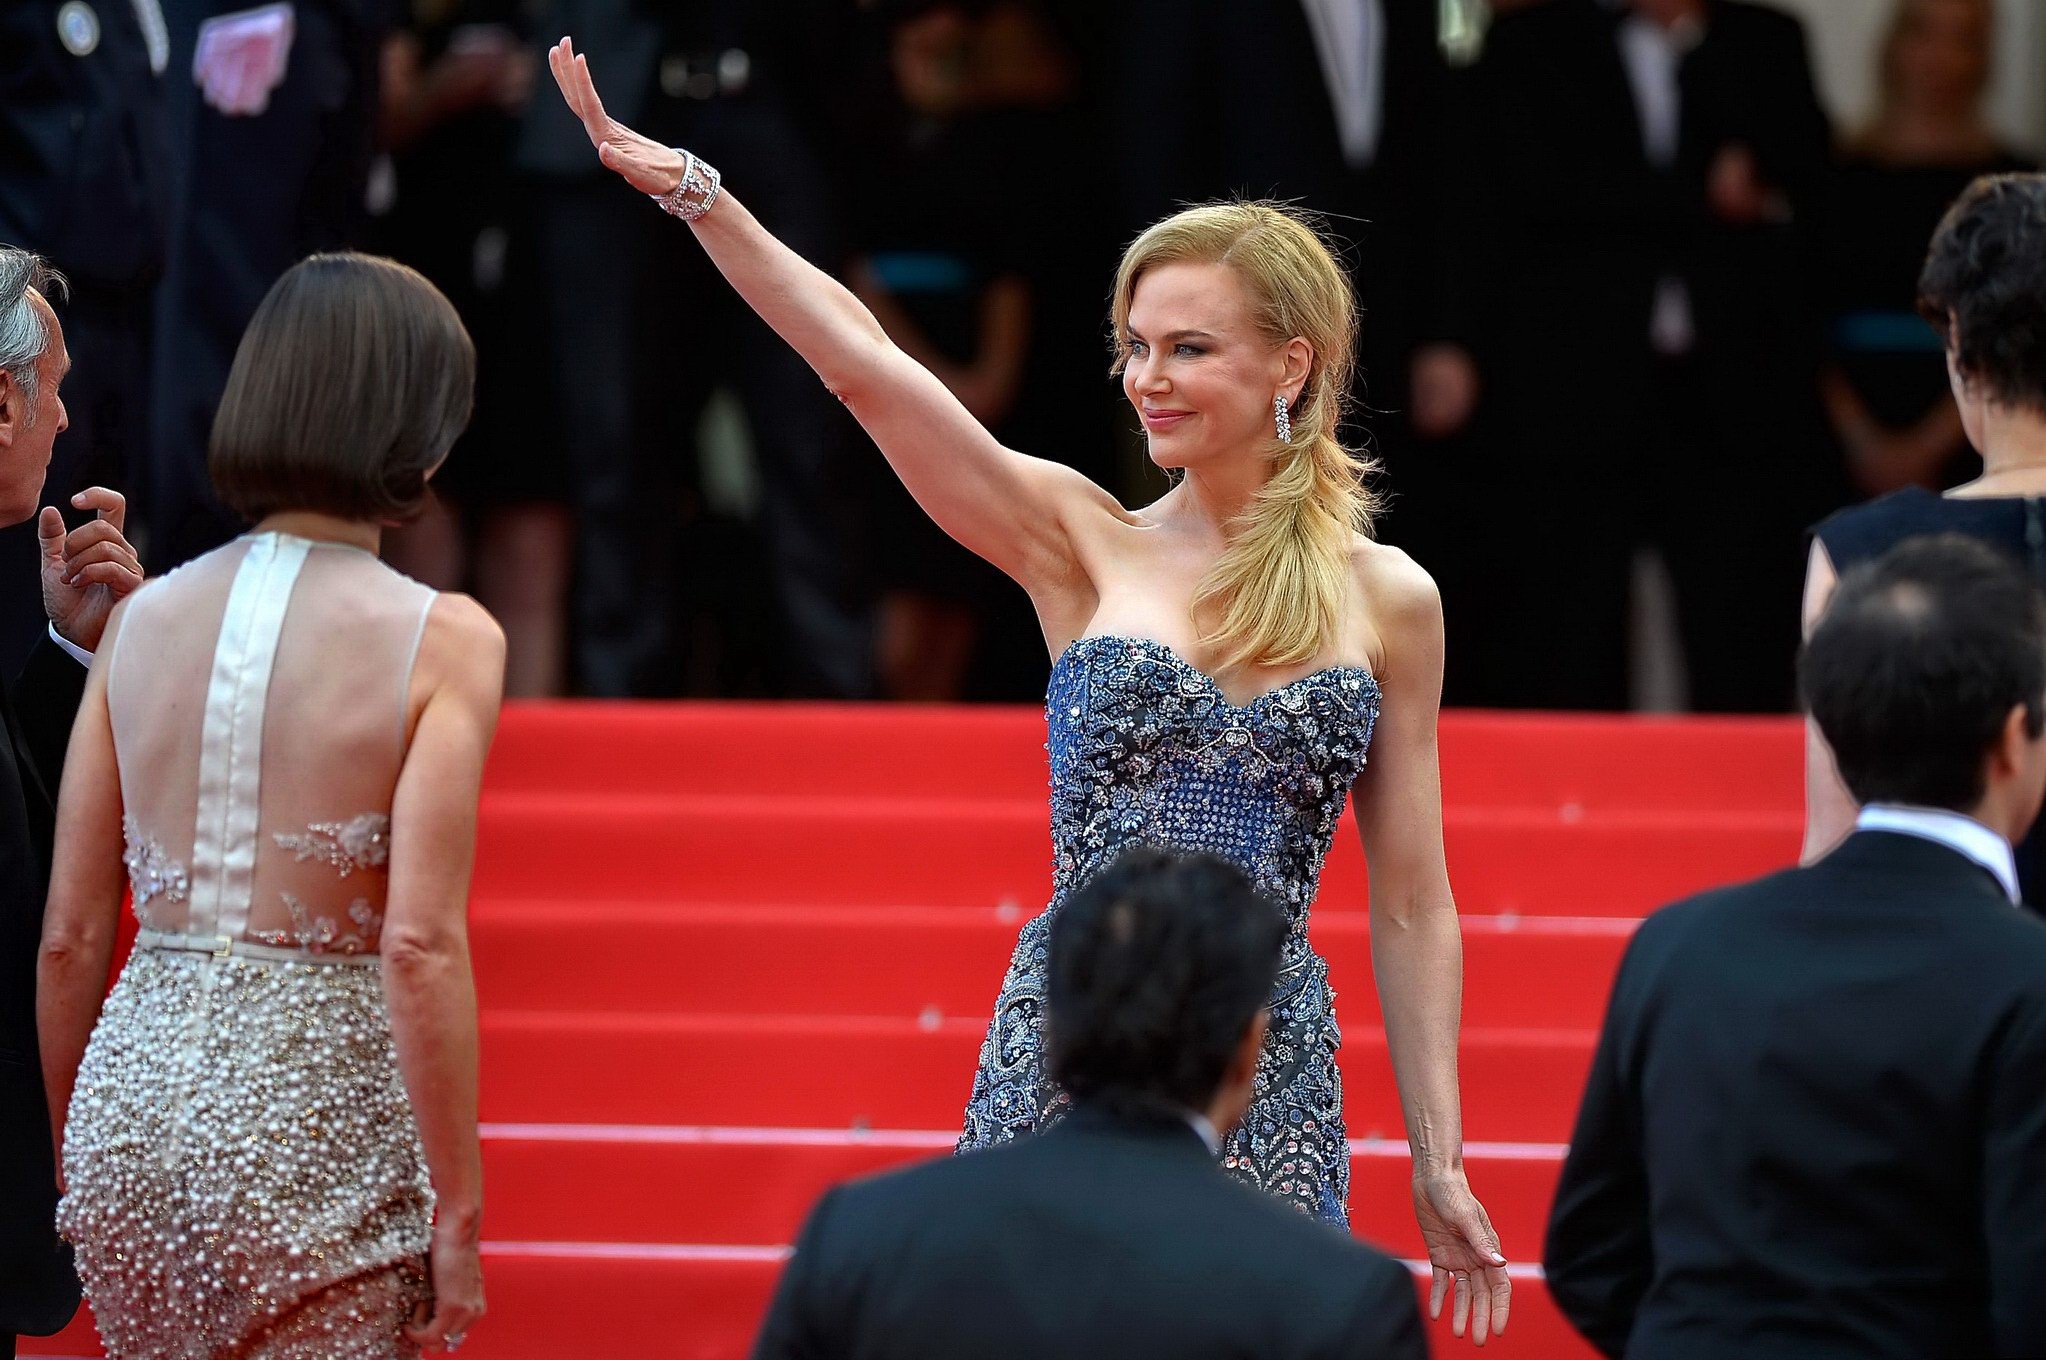 Nicole Kidman busty wearing a strapless dress at the 67th Annual Cannes Film Fes #75196370